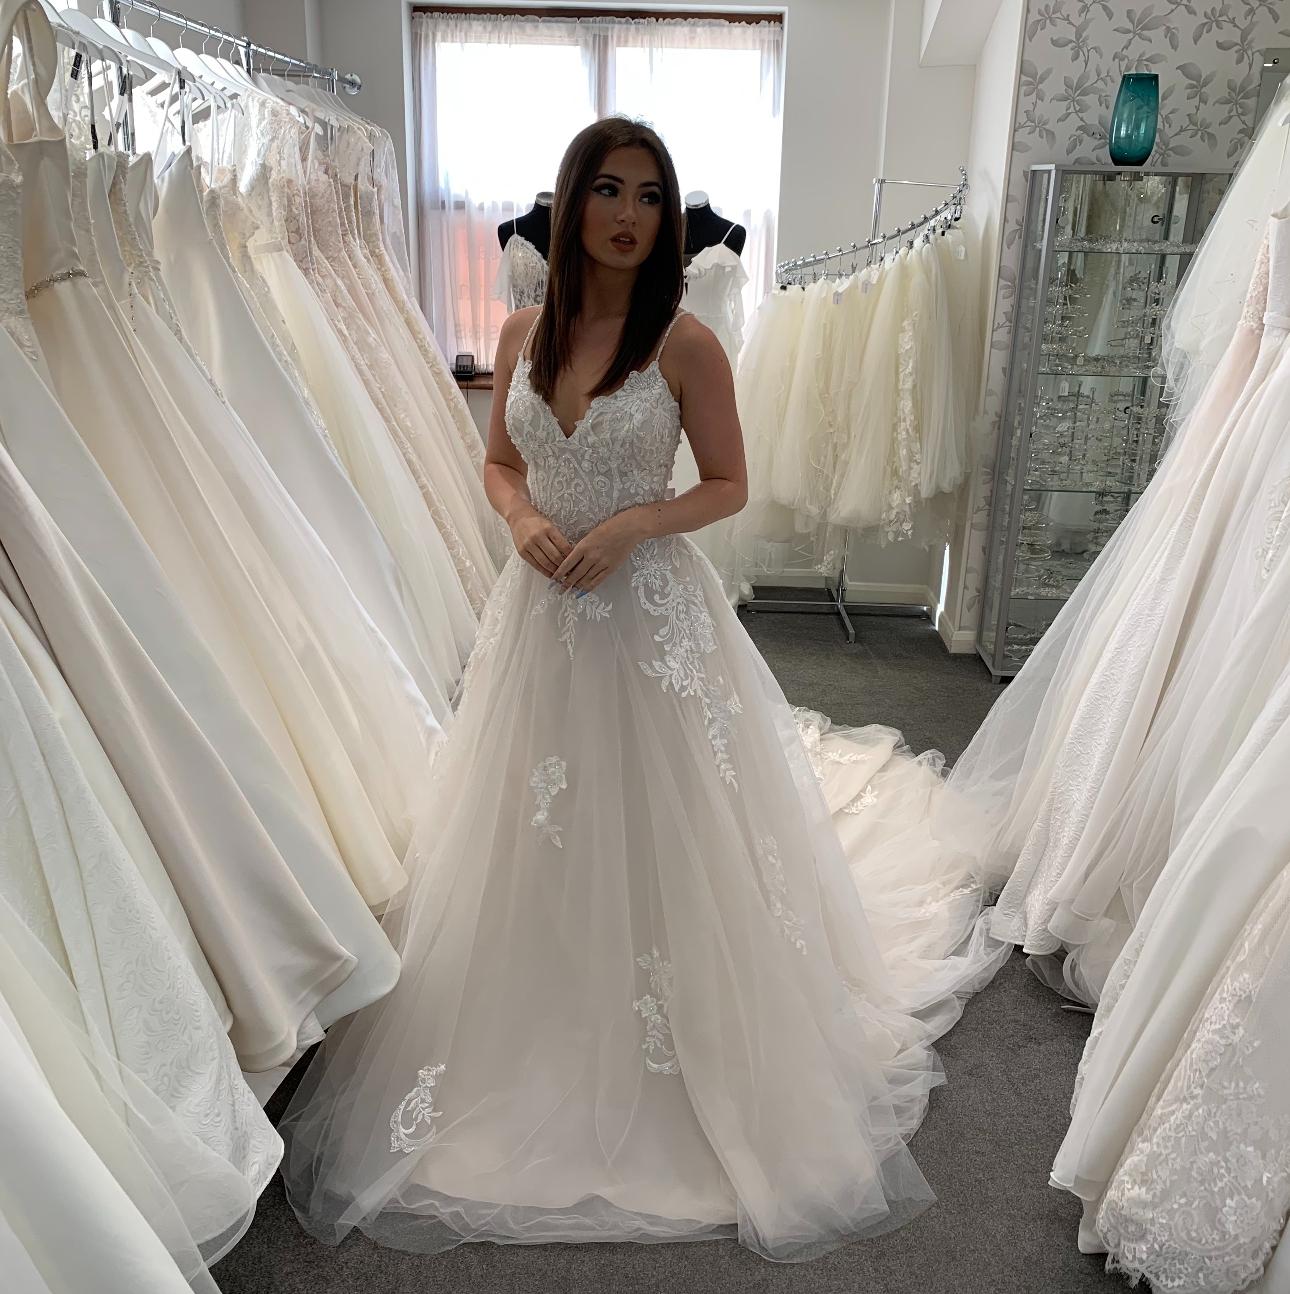 model in wedding dress in wedding shop surrounded by lots of dresses